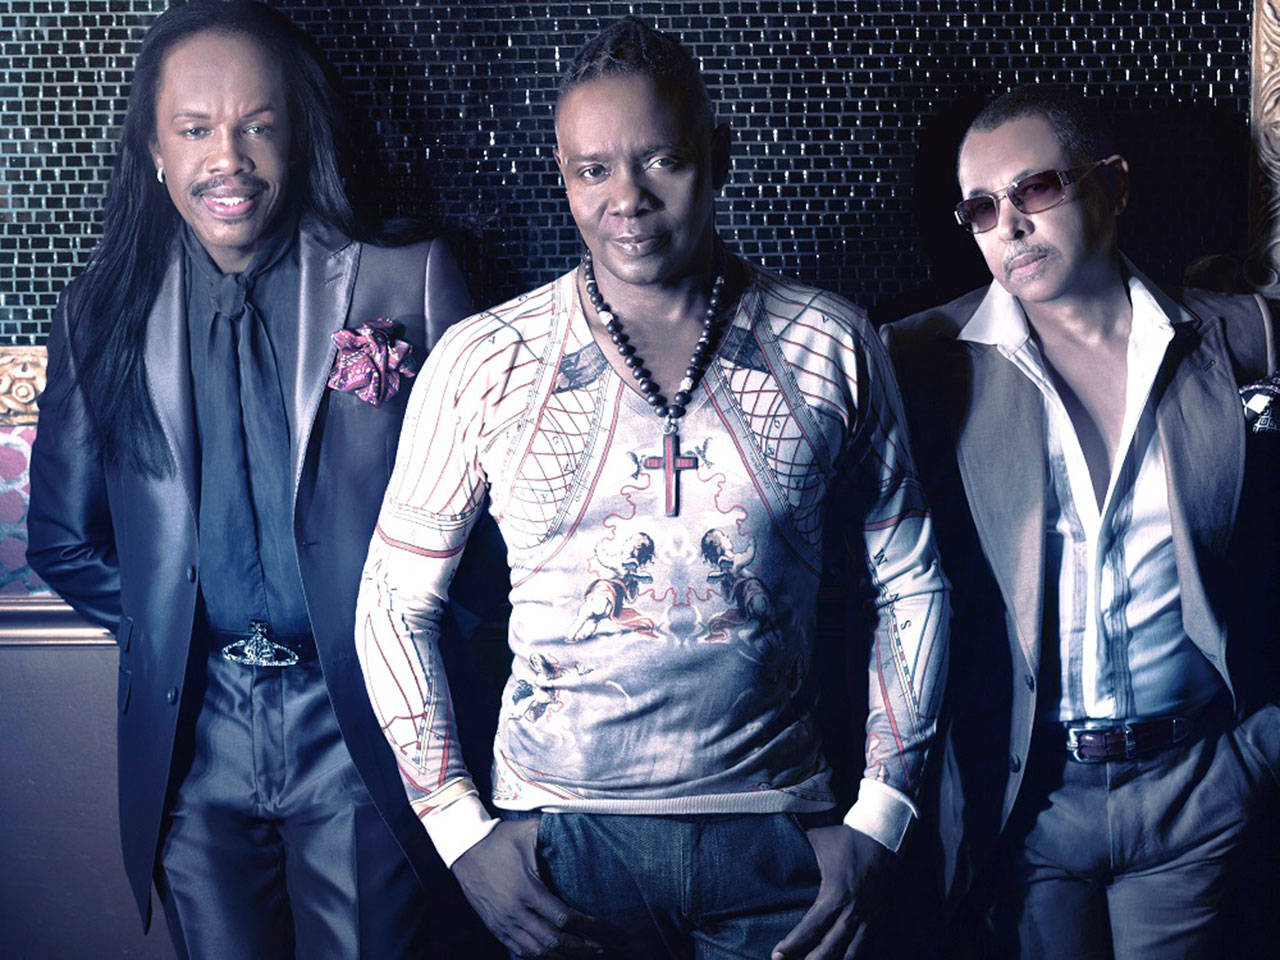 Earth, Wind & Fire has spanned the musical genres of R&B, soul, funk, jazz, disco, pop, rock, Latin and African. They are one of the most successful bands of all time. COURTESY PHOTO